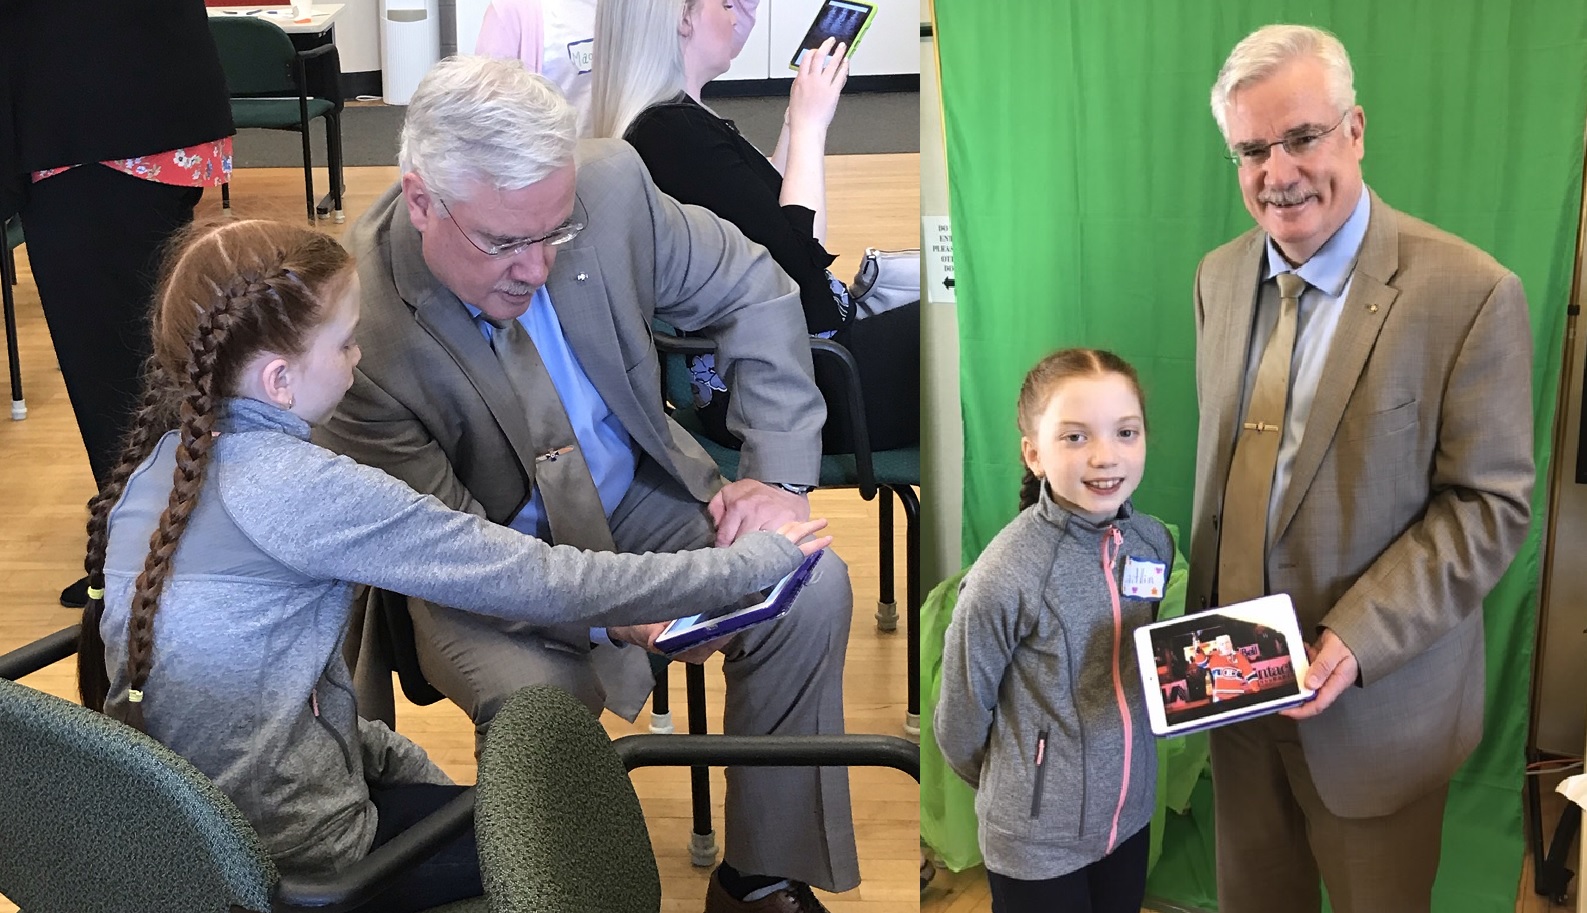 Beachy Cove Elementary student-expert Caitlin helps Director Stack learn new skills using green screen technology.